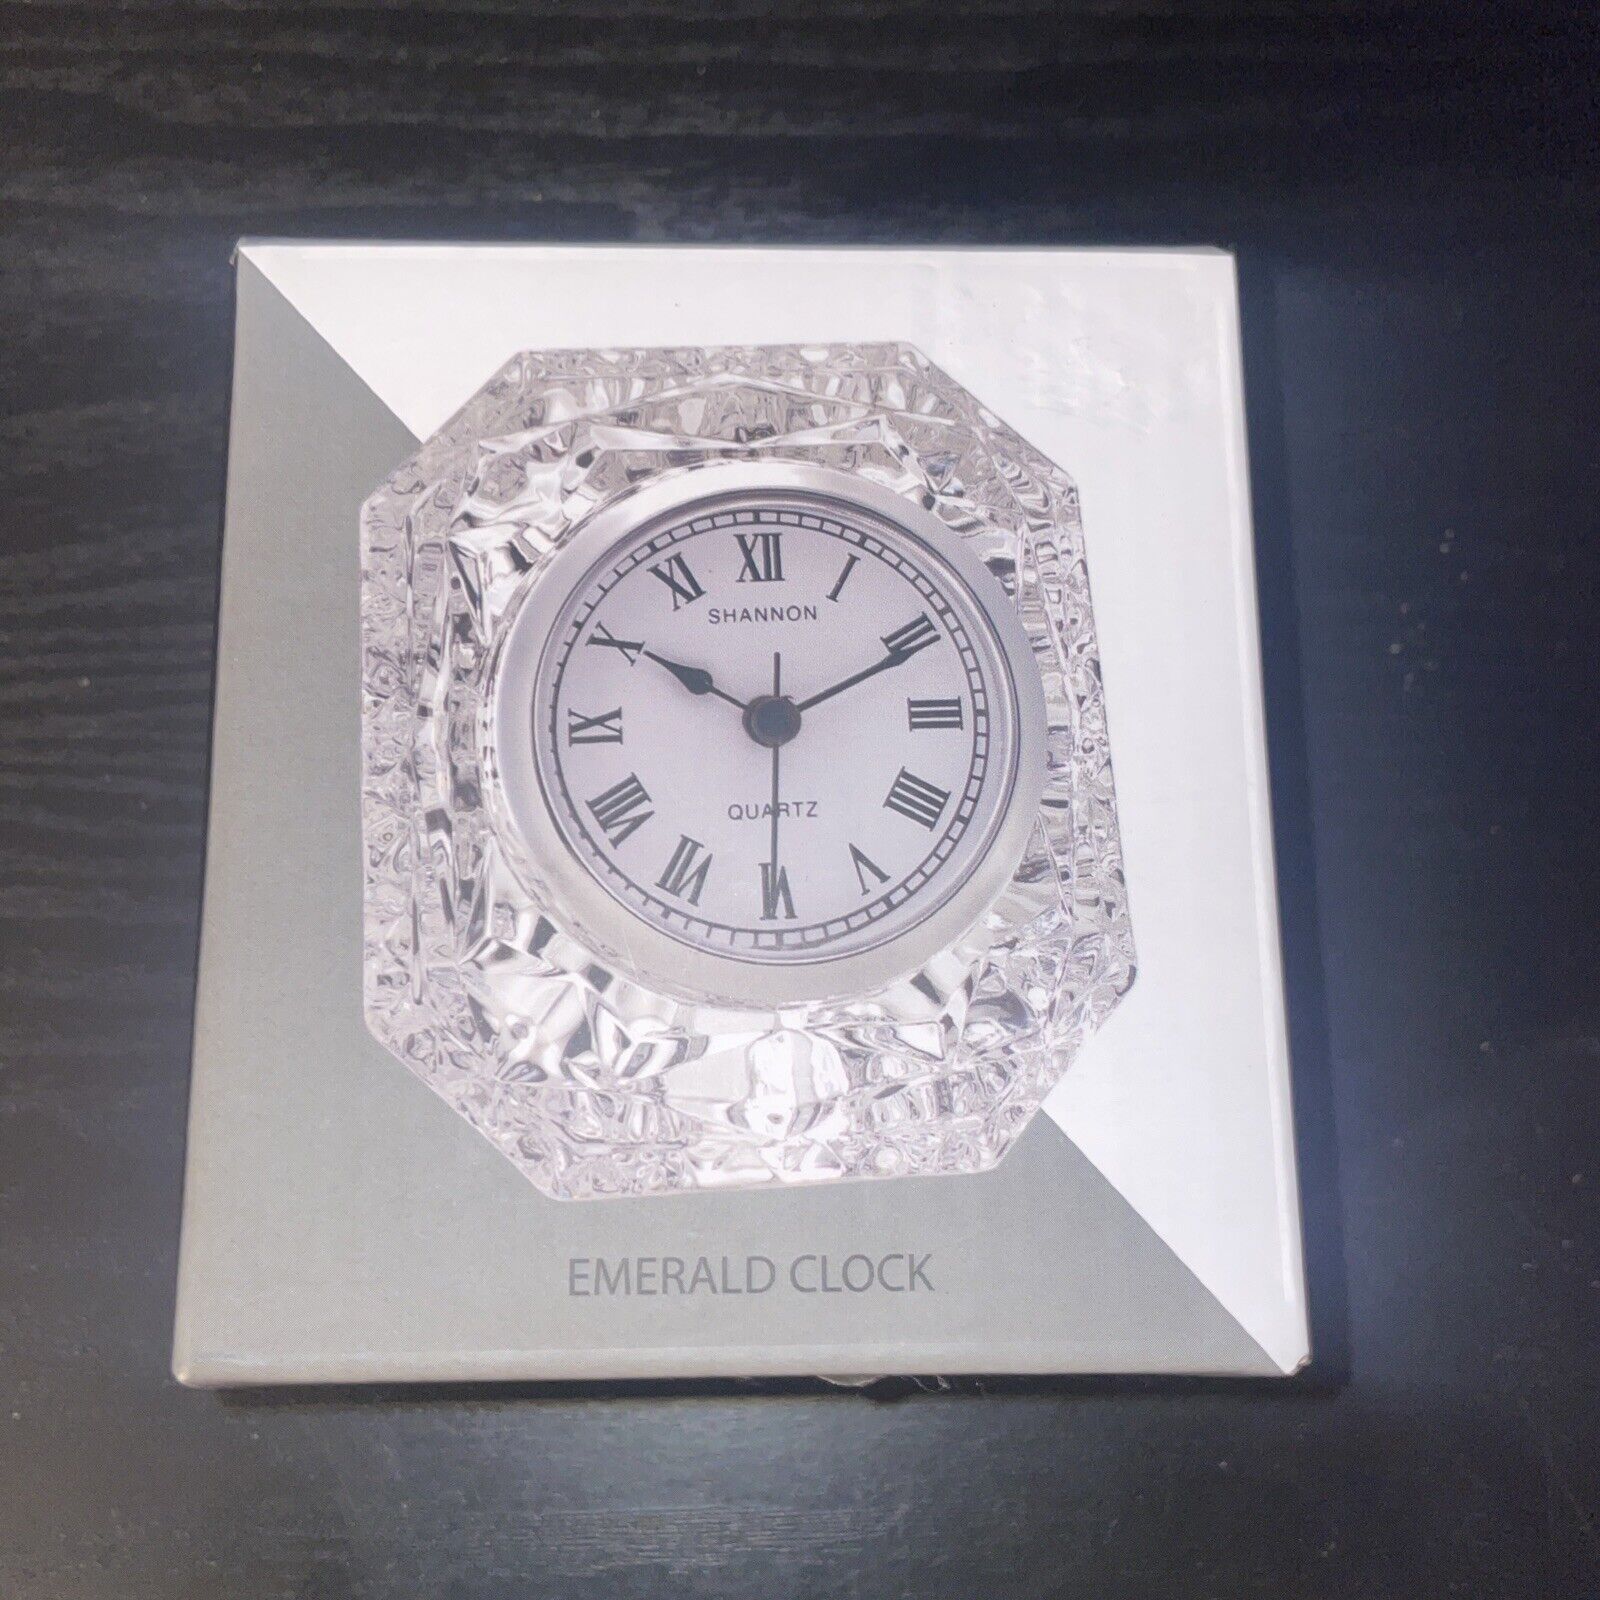 Shannon Crystal Emerald Clock By Godinger Hand Crafted Lead Crystal.